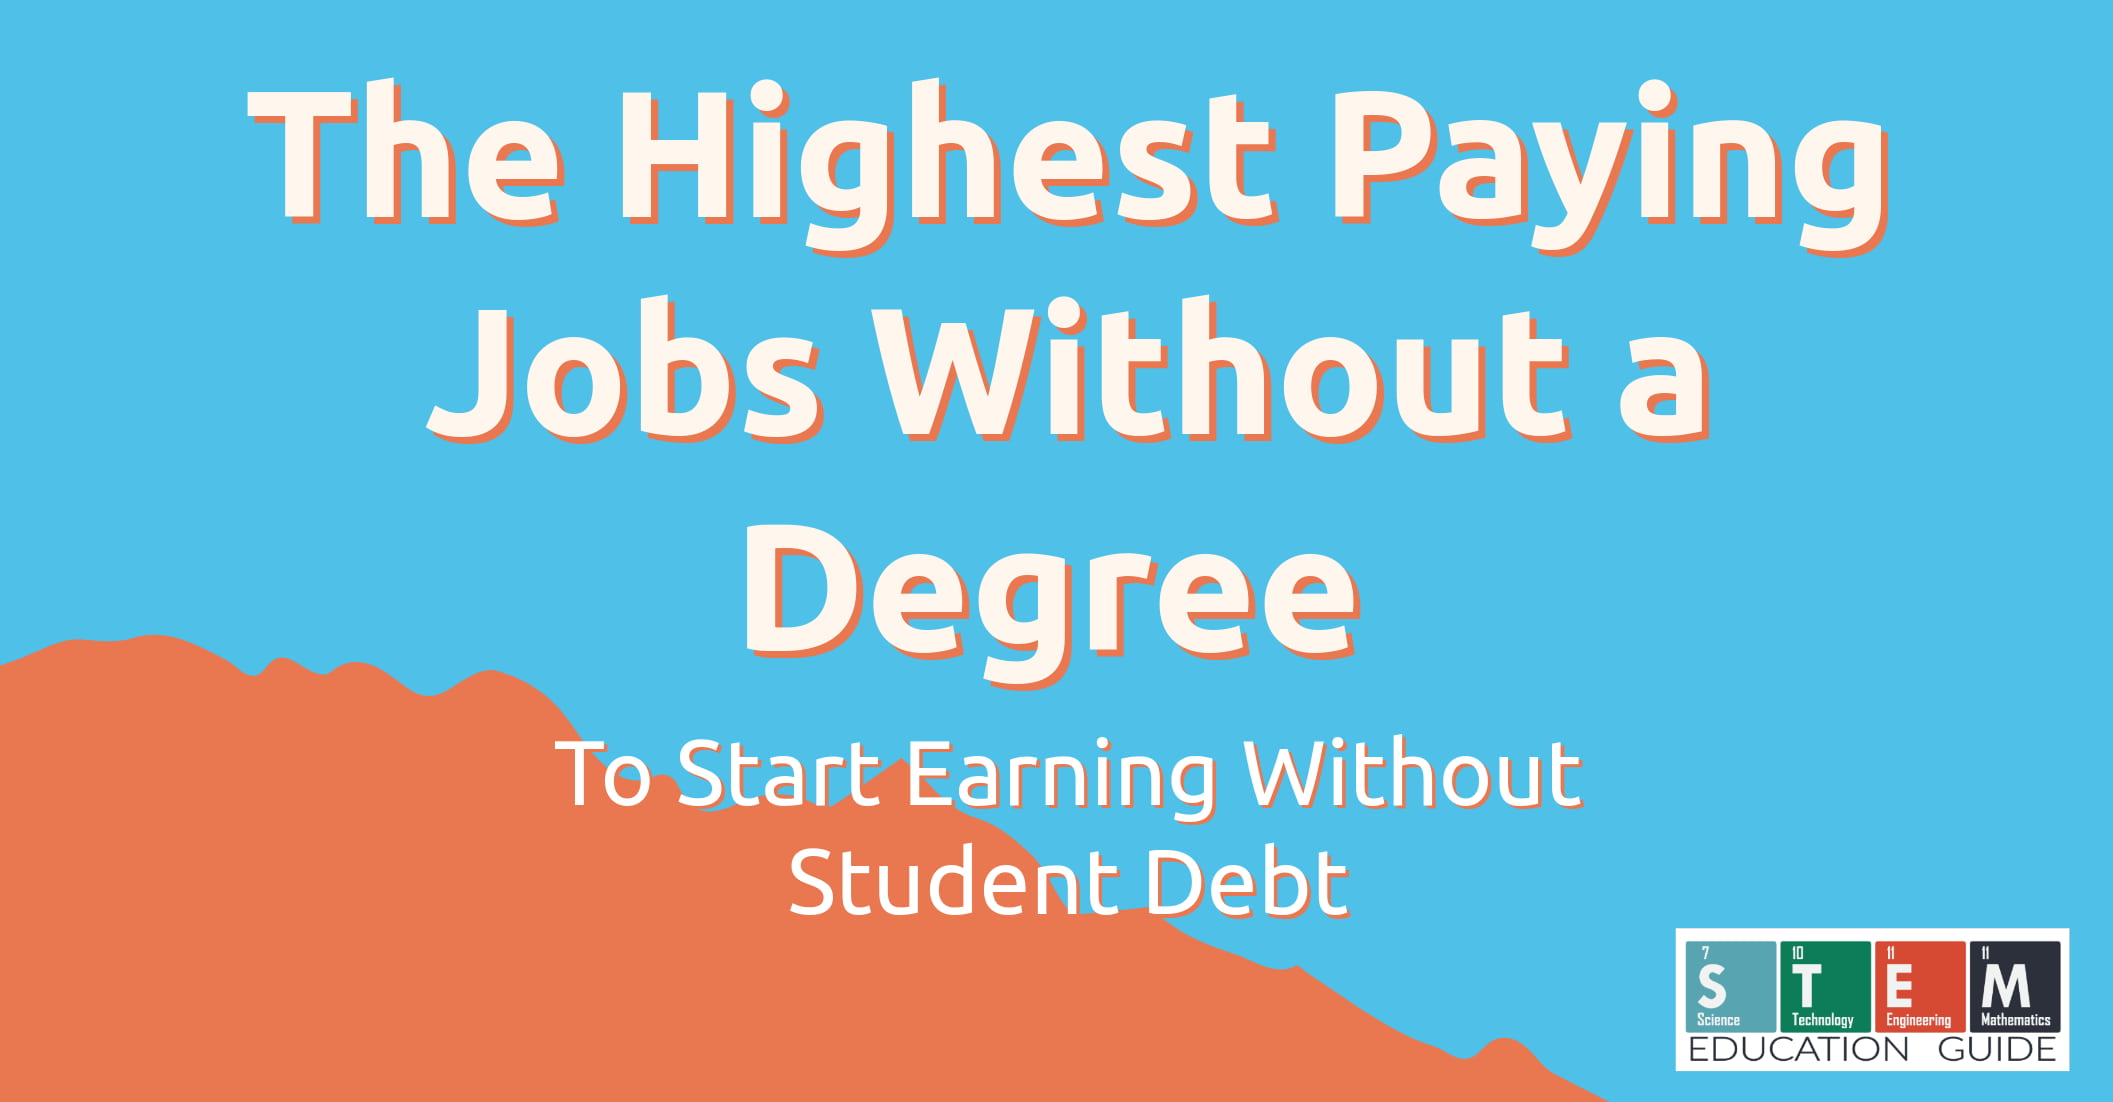 The Highest Paying Jobs Without a Degree To Start Earning Without Student Debt